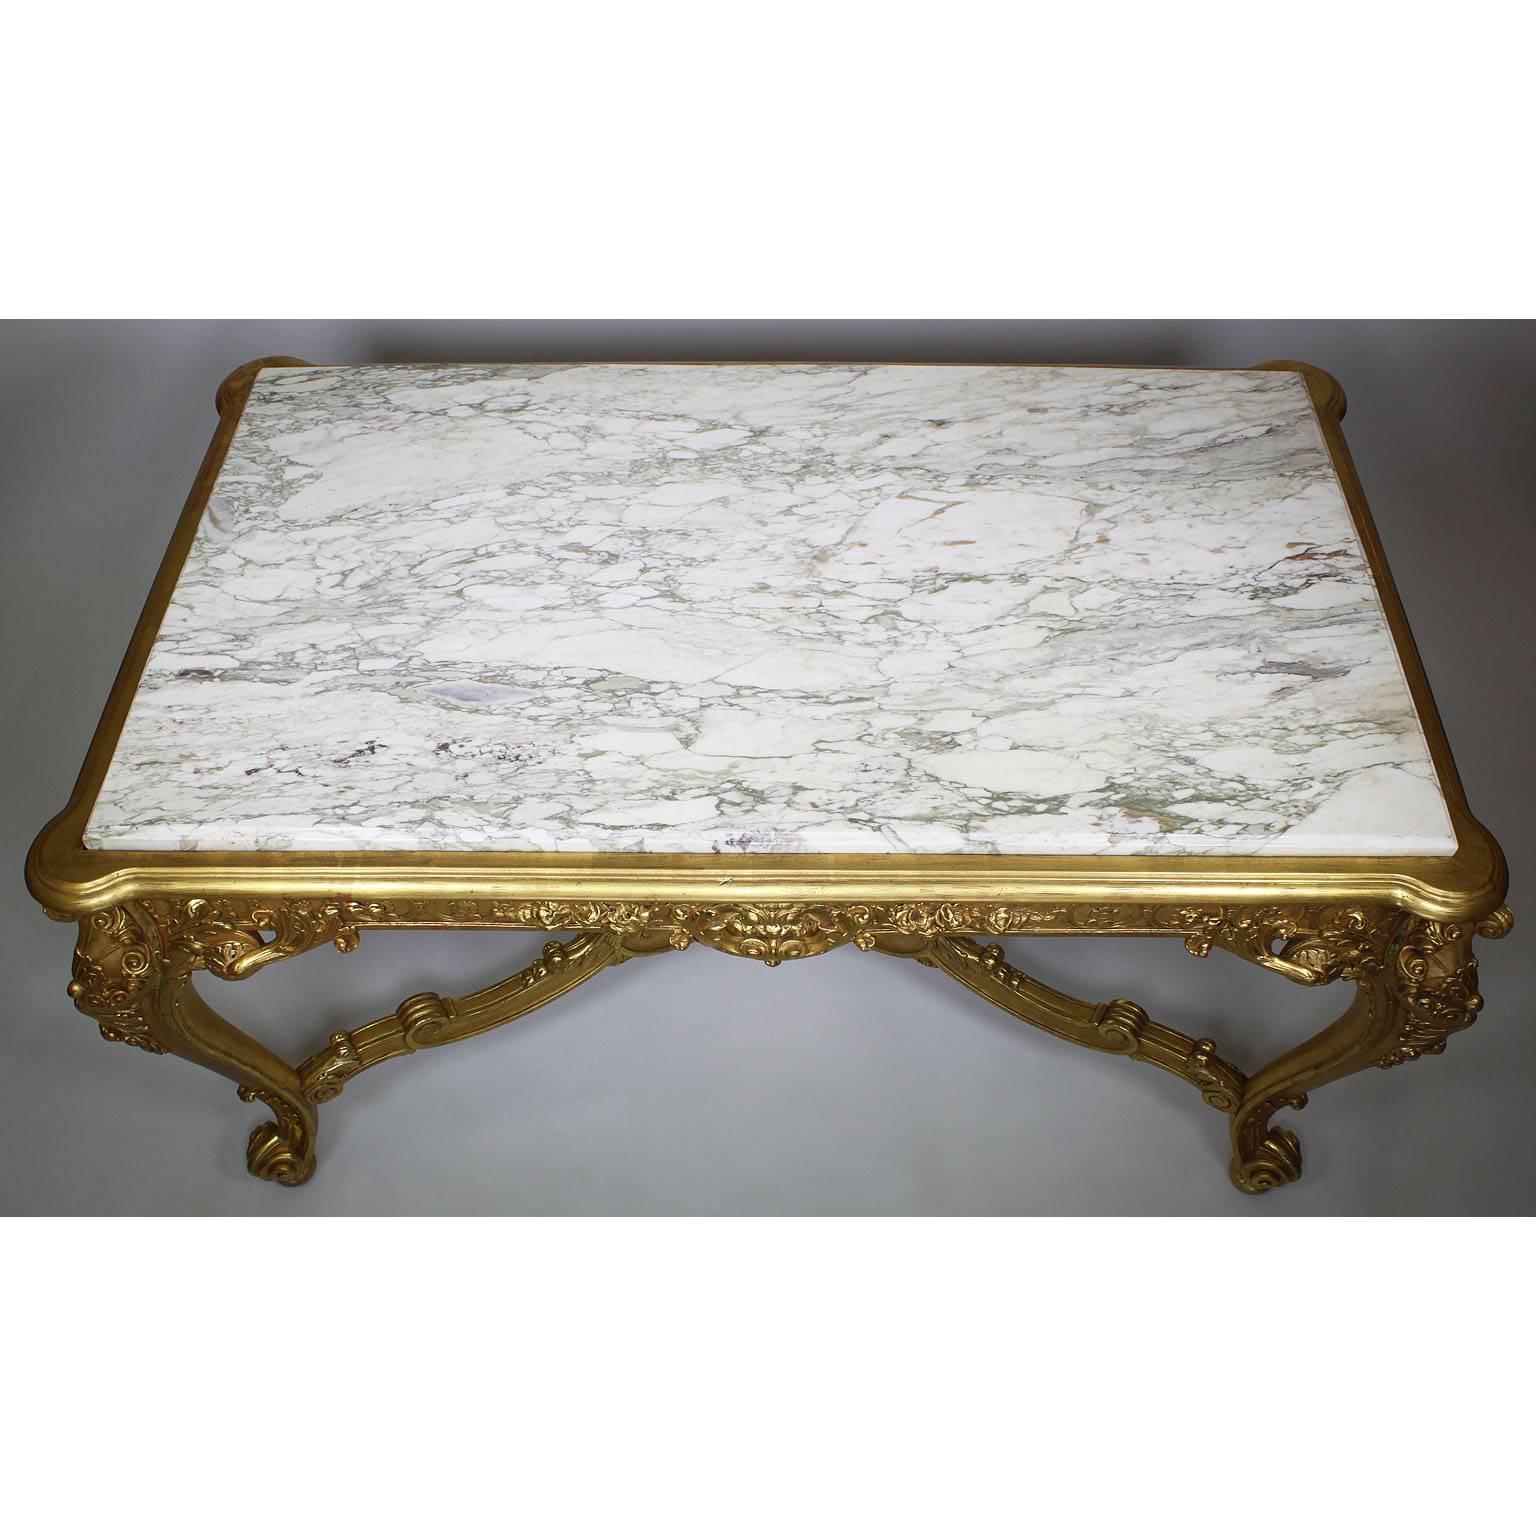 Fine French 19th-20th Century Louis XV Style Giltwood Carved Center Hall Table For Sale 3